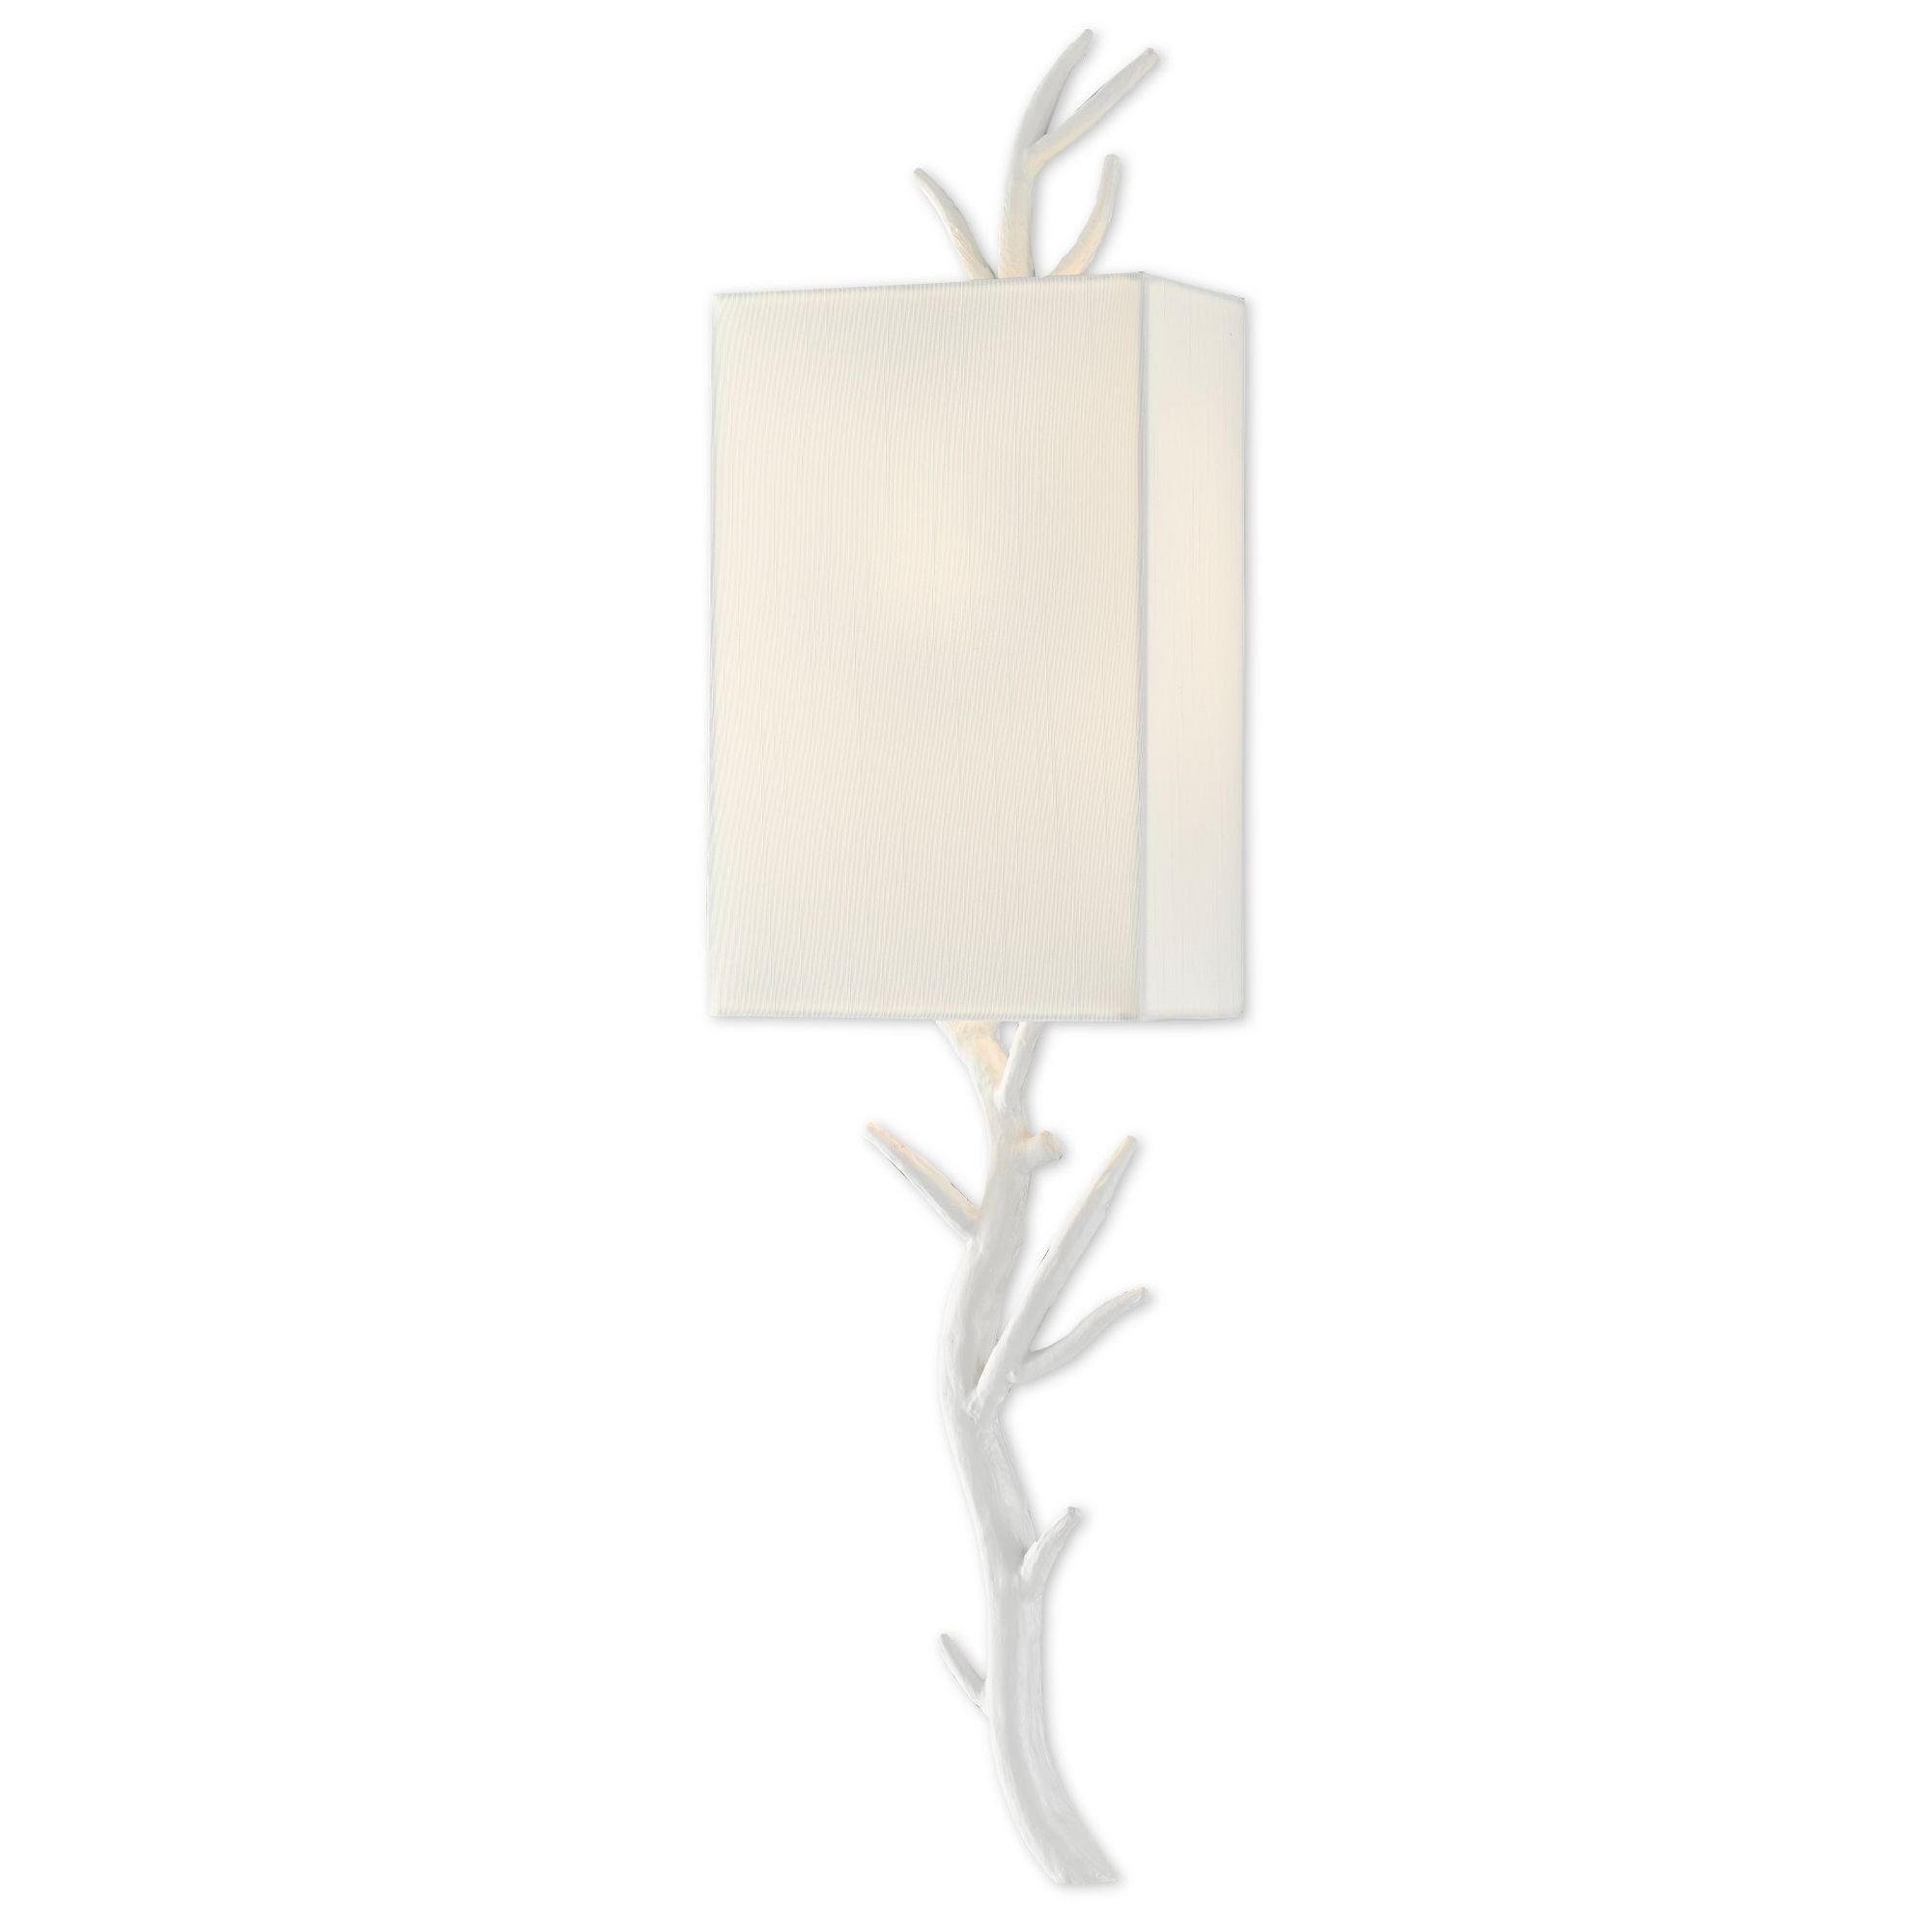 Baneberry White Wall Sconce, White Shade, Right - Gesso White